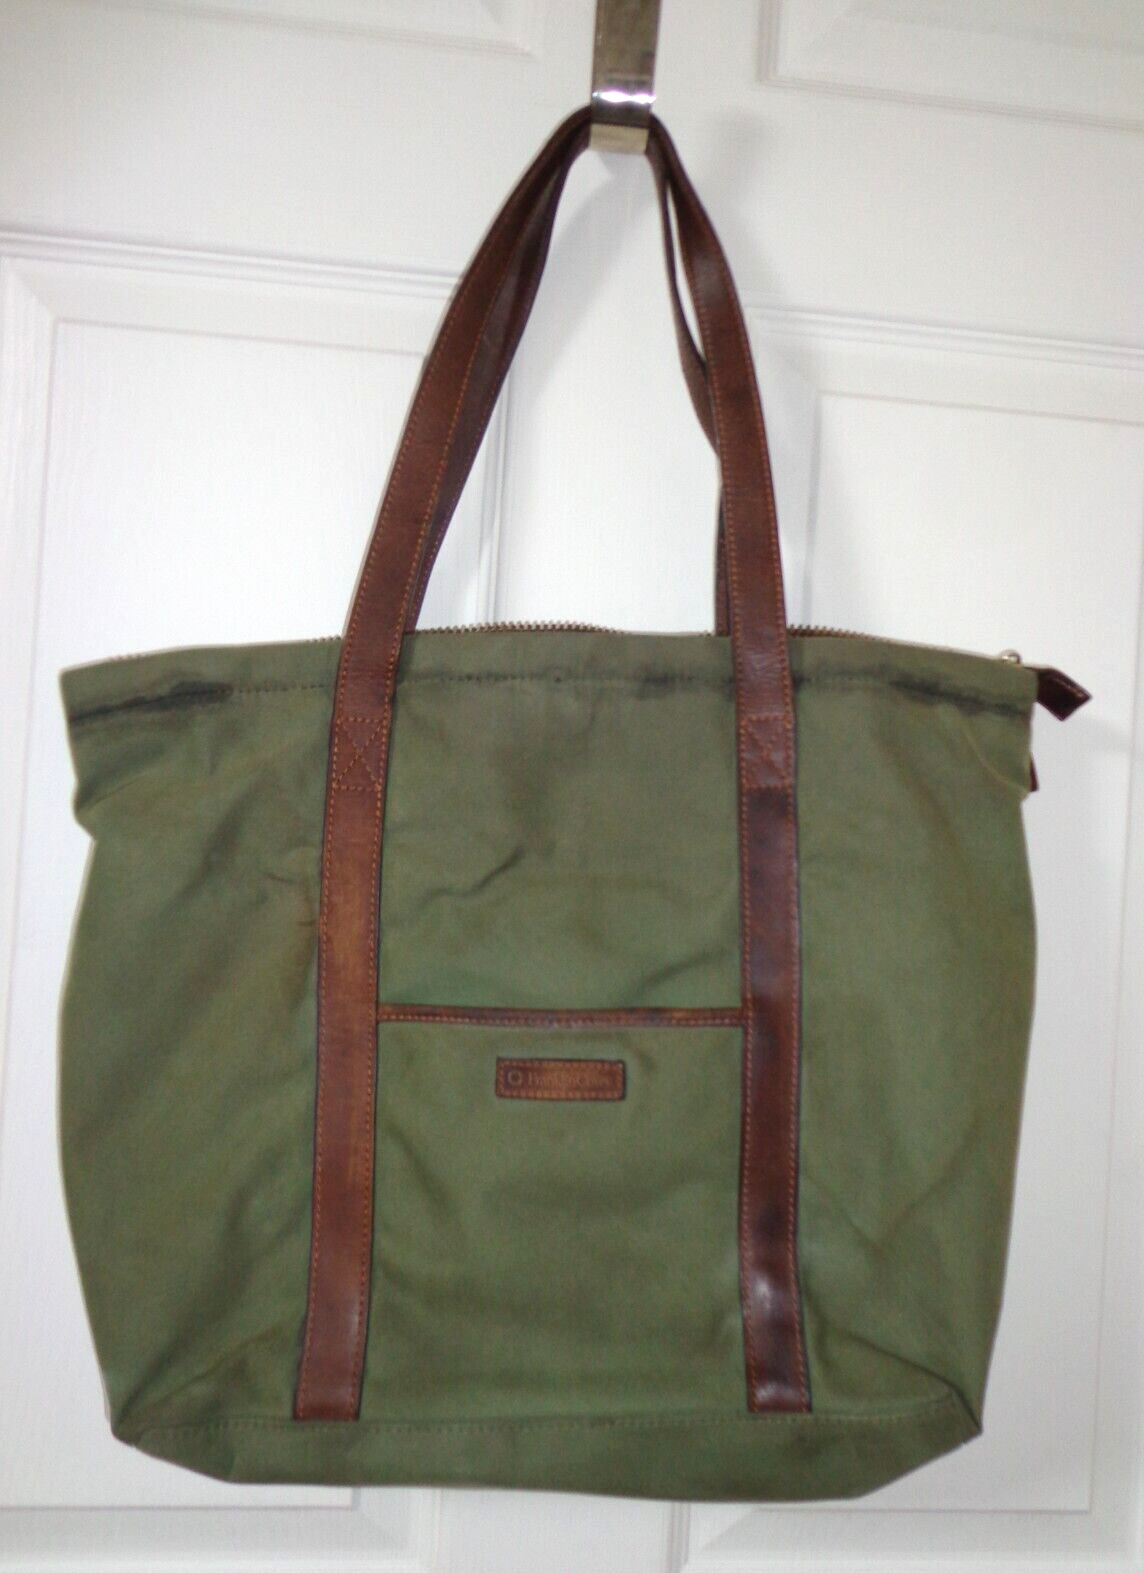 Franklin Covey Tote - image 1